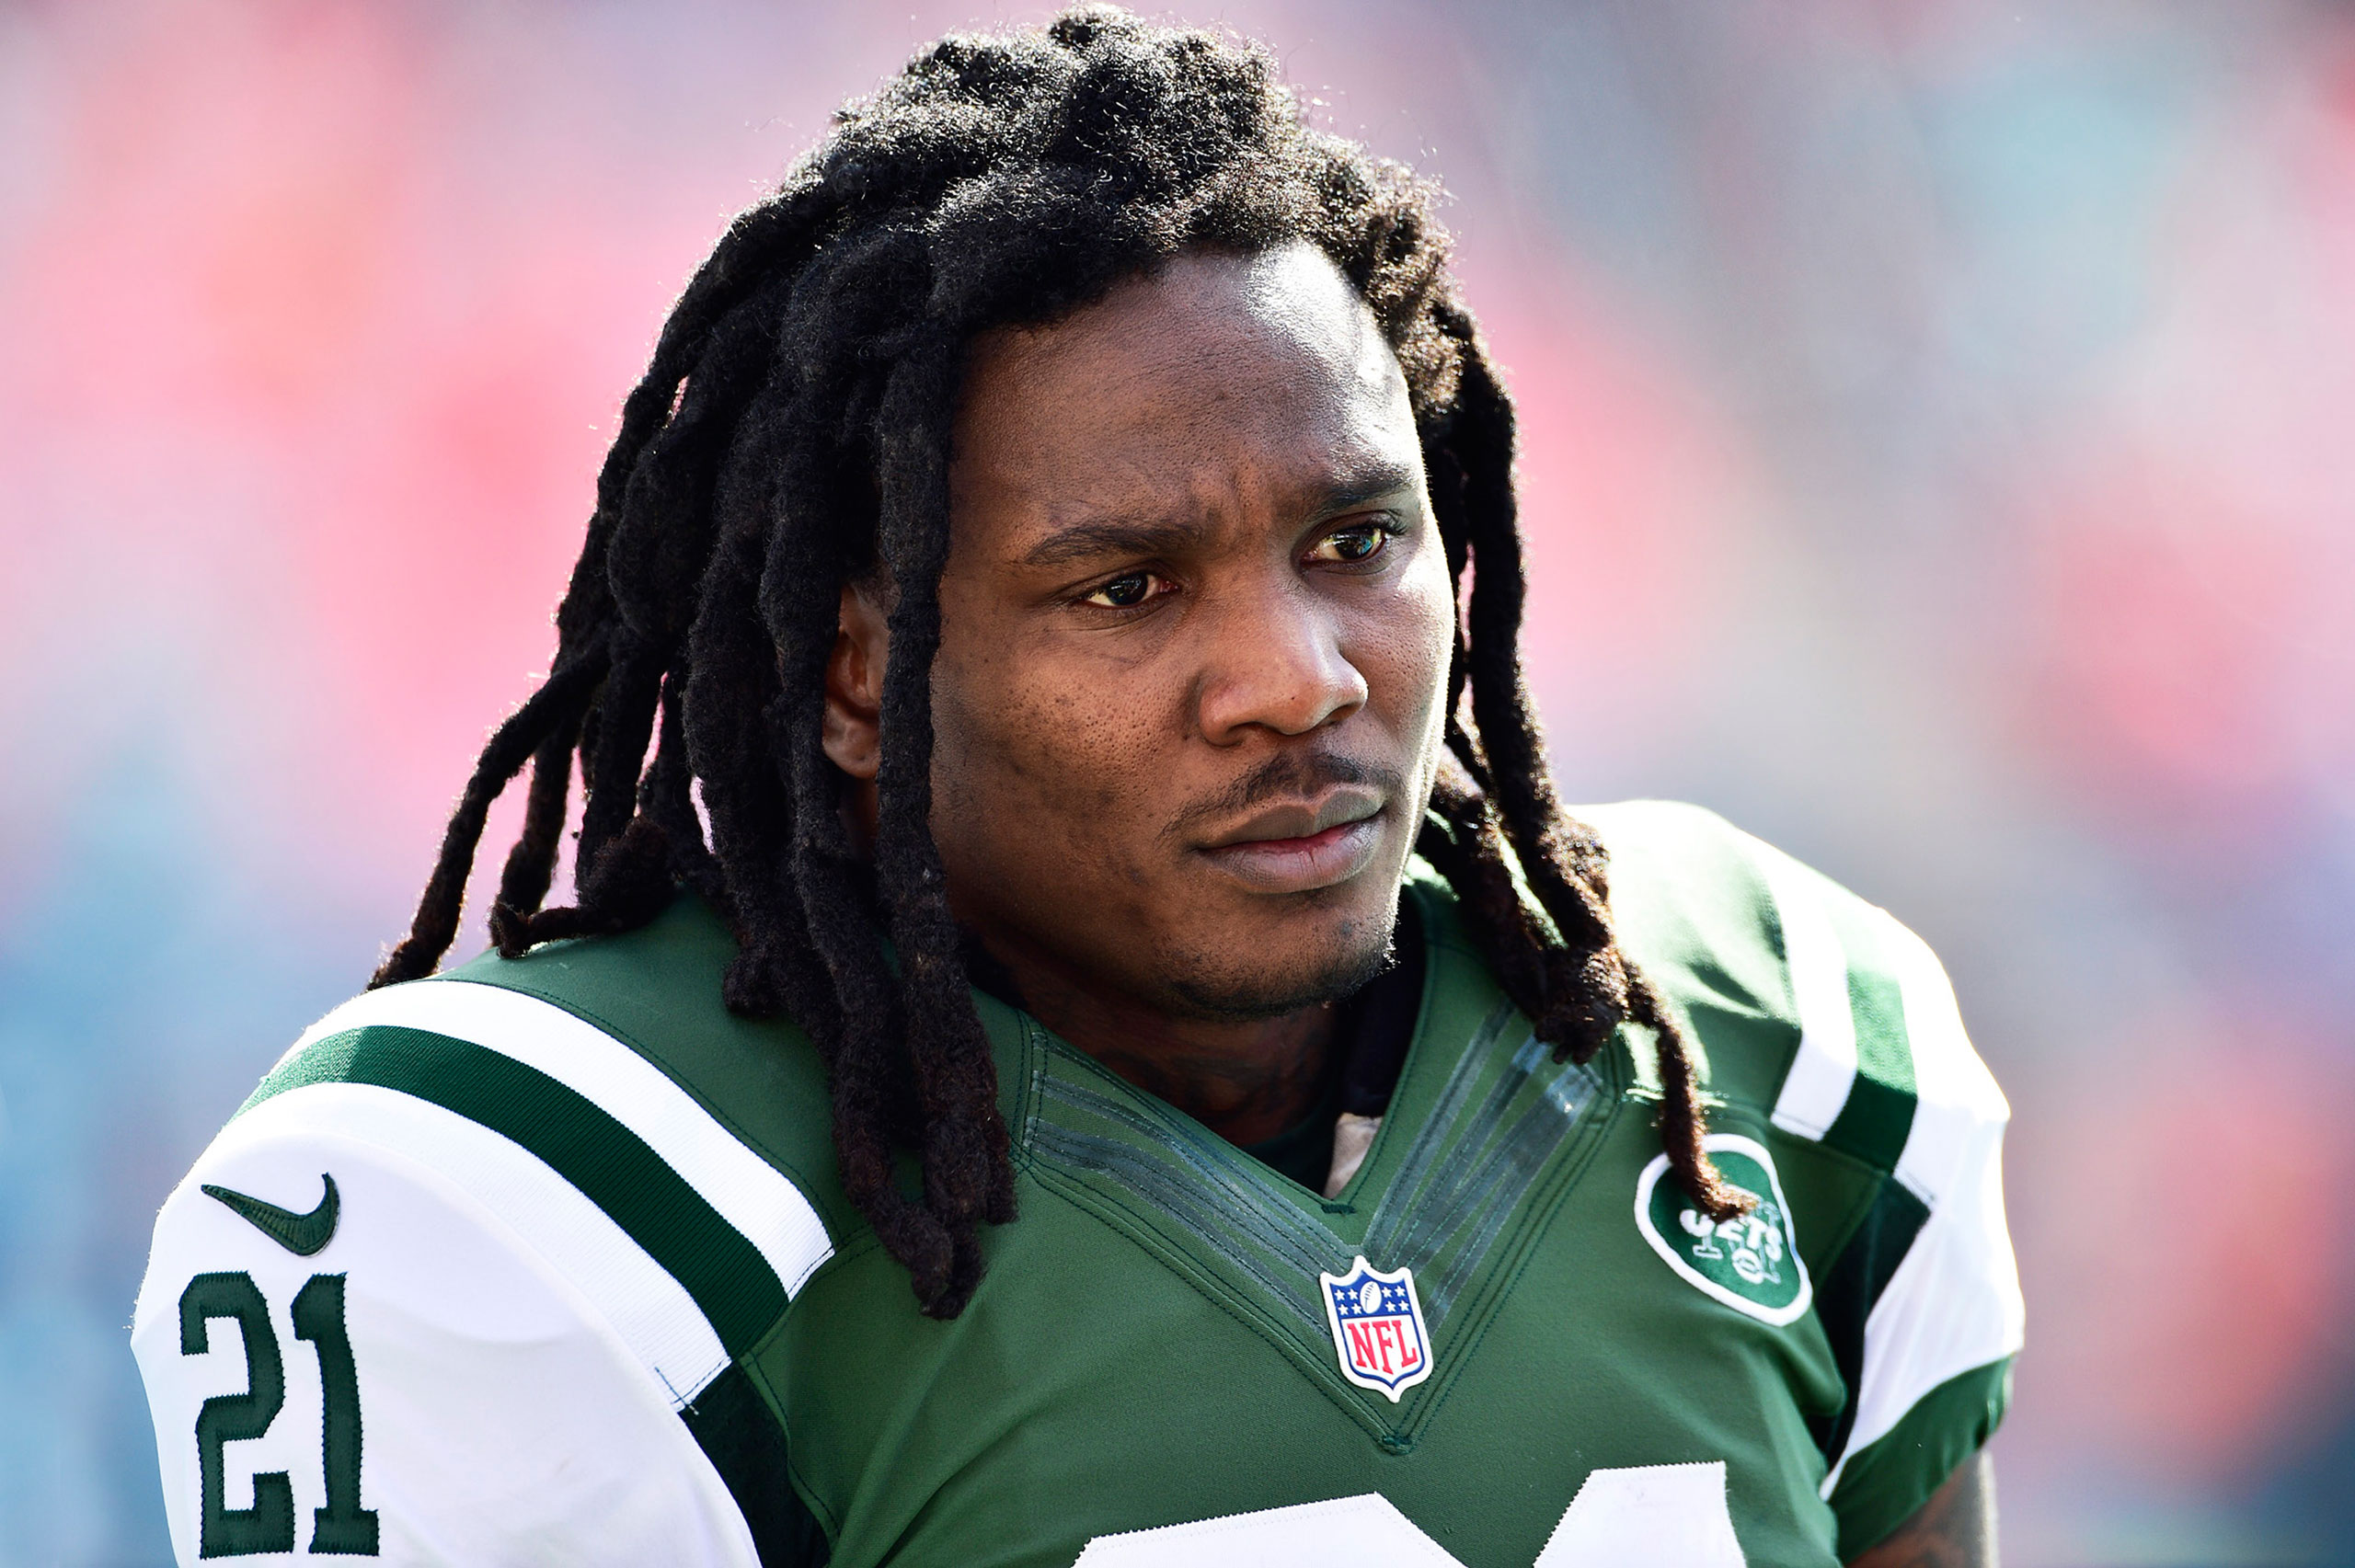 Running back Chris Johnson, then #21 of the New York Jets, looks on before a game against the Miami Dolphins at Sun Life Stadium on Dec. 28, 2014 in Miami Gardens, Fl. (Ronald C. Modra—Getty Images)